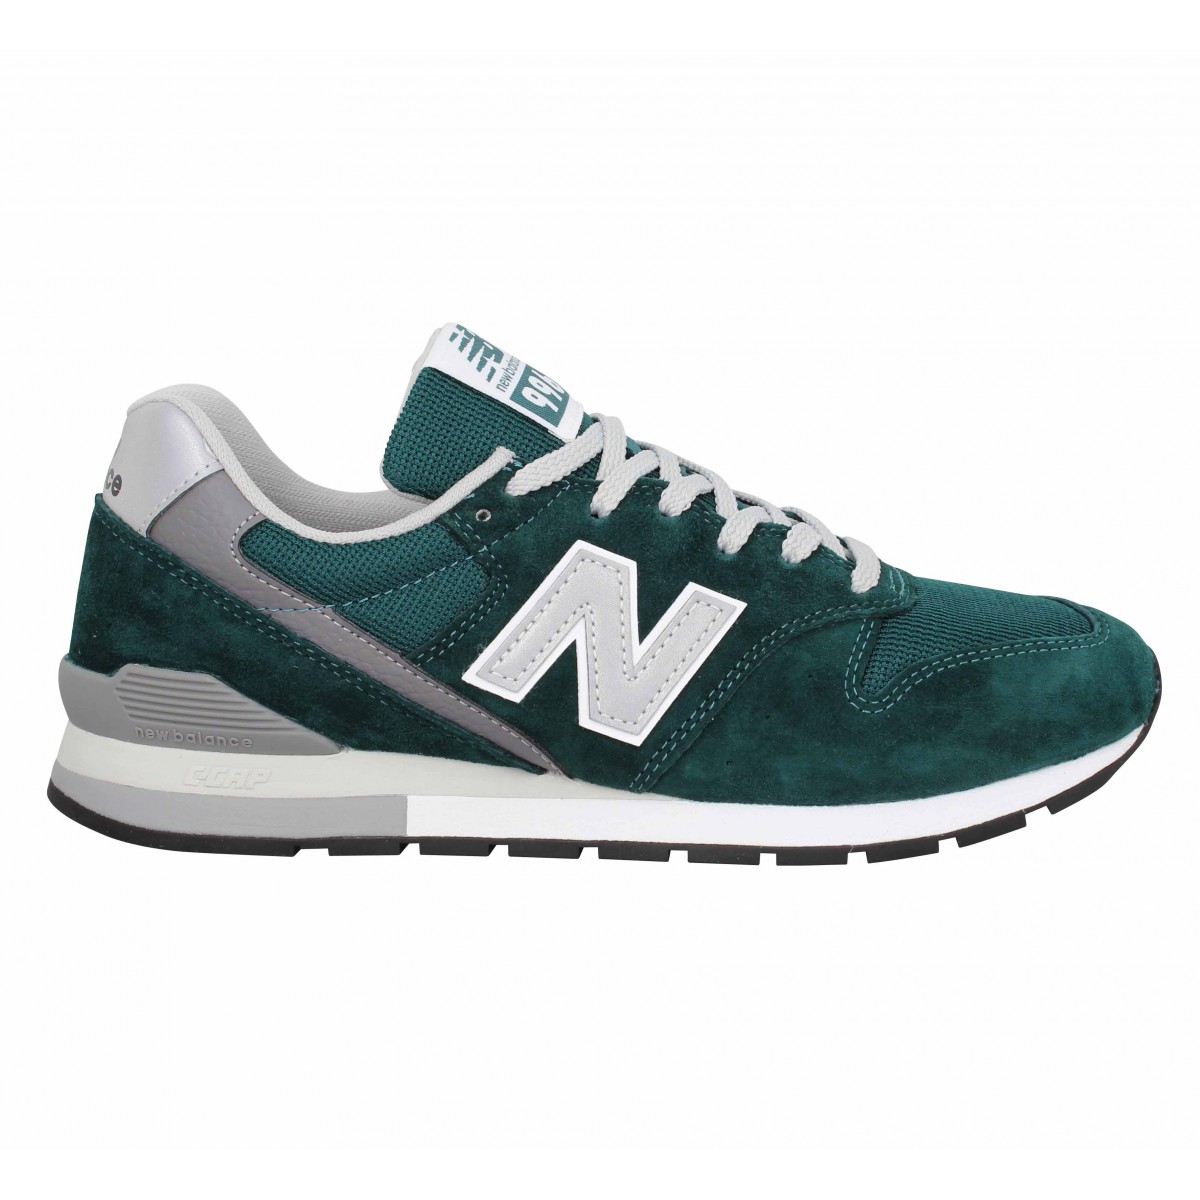 New balance cm 996 velours toile homme vert homme | Fanny chaussures